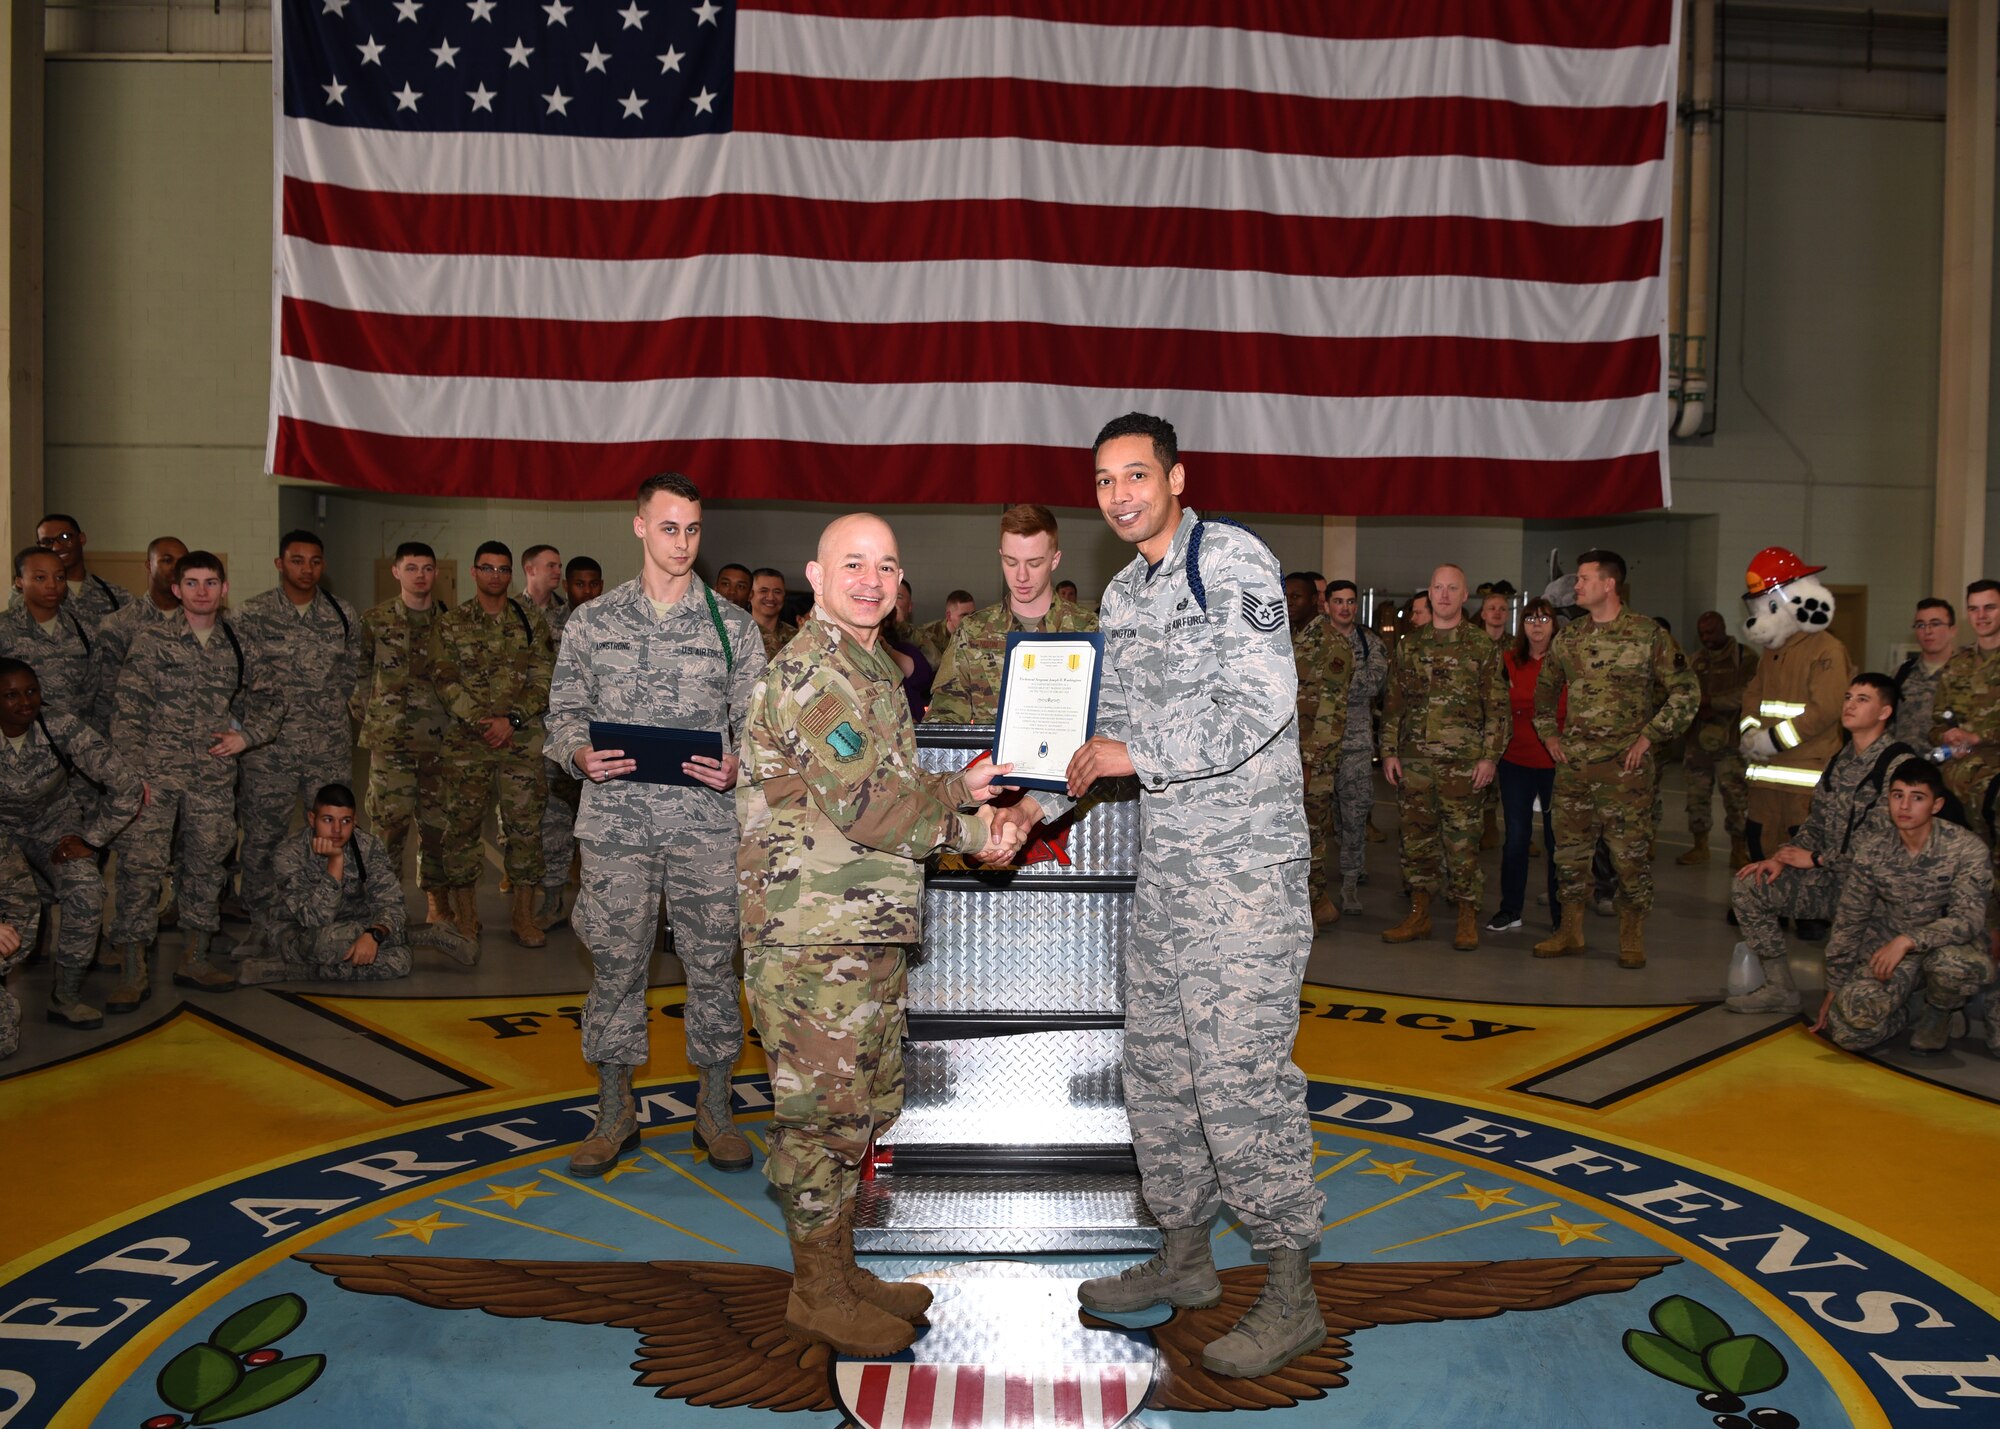 U.S. Air Force Col. Andres Nazario, 17th Training Wing commander, awards Tech. Sgt. Joseph Washington, 315th Training Squadron assistant flight chief and military training leader, as a Master MTL in the Louis F. Garland Department of Defense Fire Academy High Bay on Goodfellow Air Force Base, Texas, Feb. 7, 2020. As the first Master MTL position in the Air Education and Training Command history, new position comes with a higher standard to mentor, train and lead. (U.S. Air Force photo by Airman 1st Class Abbey Rieves)